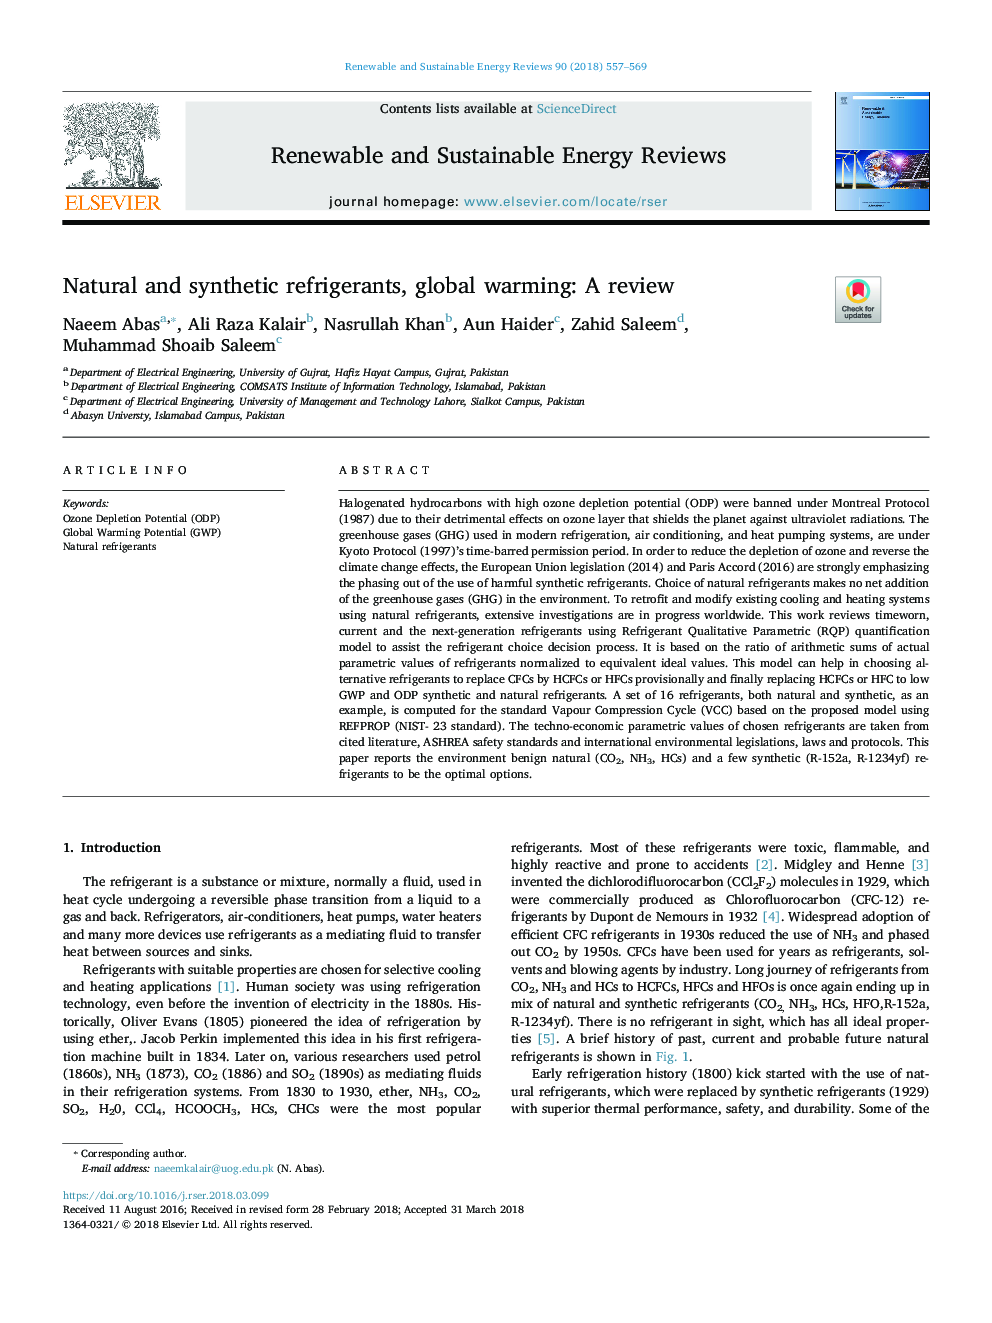 Natural and synthetic refrigerants, global warming: A review